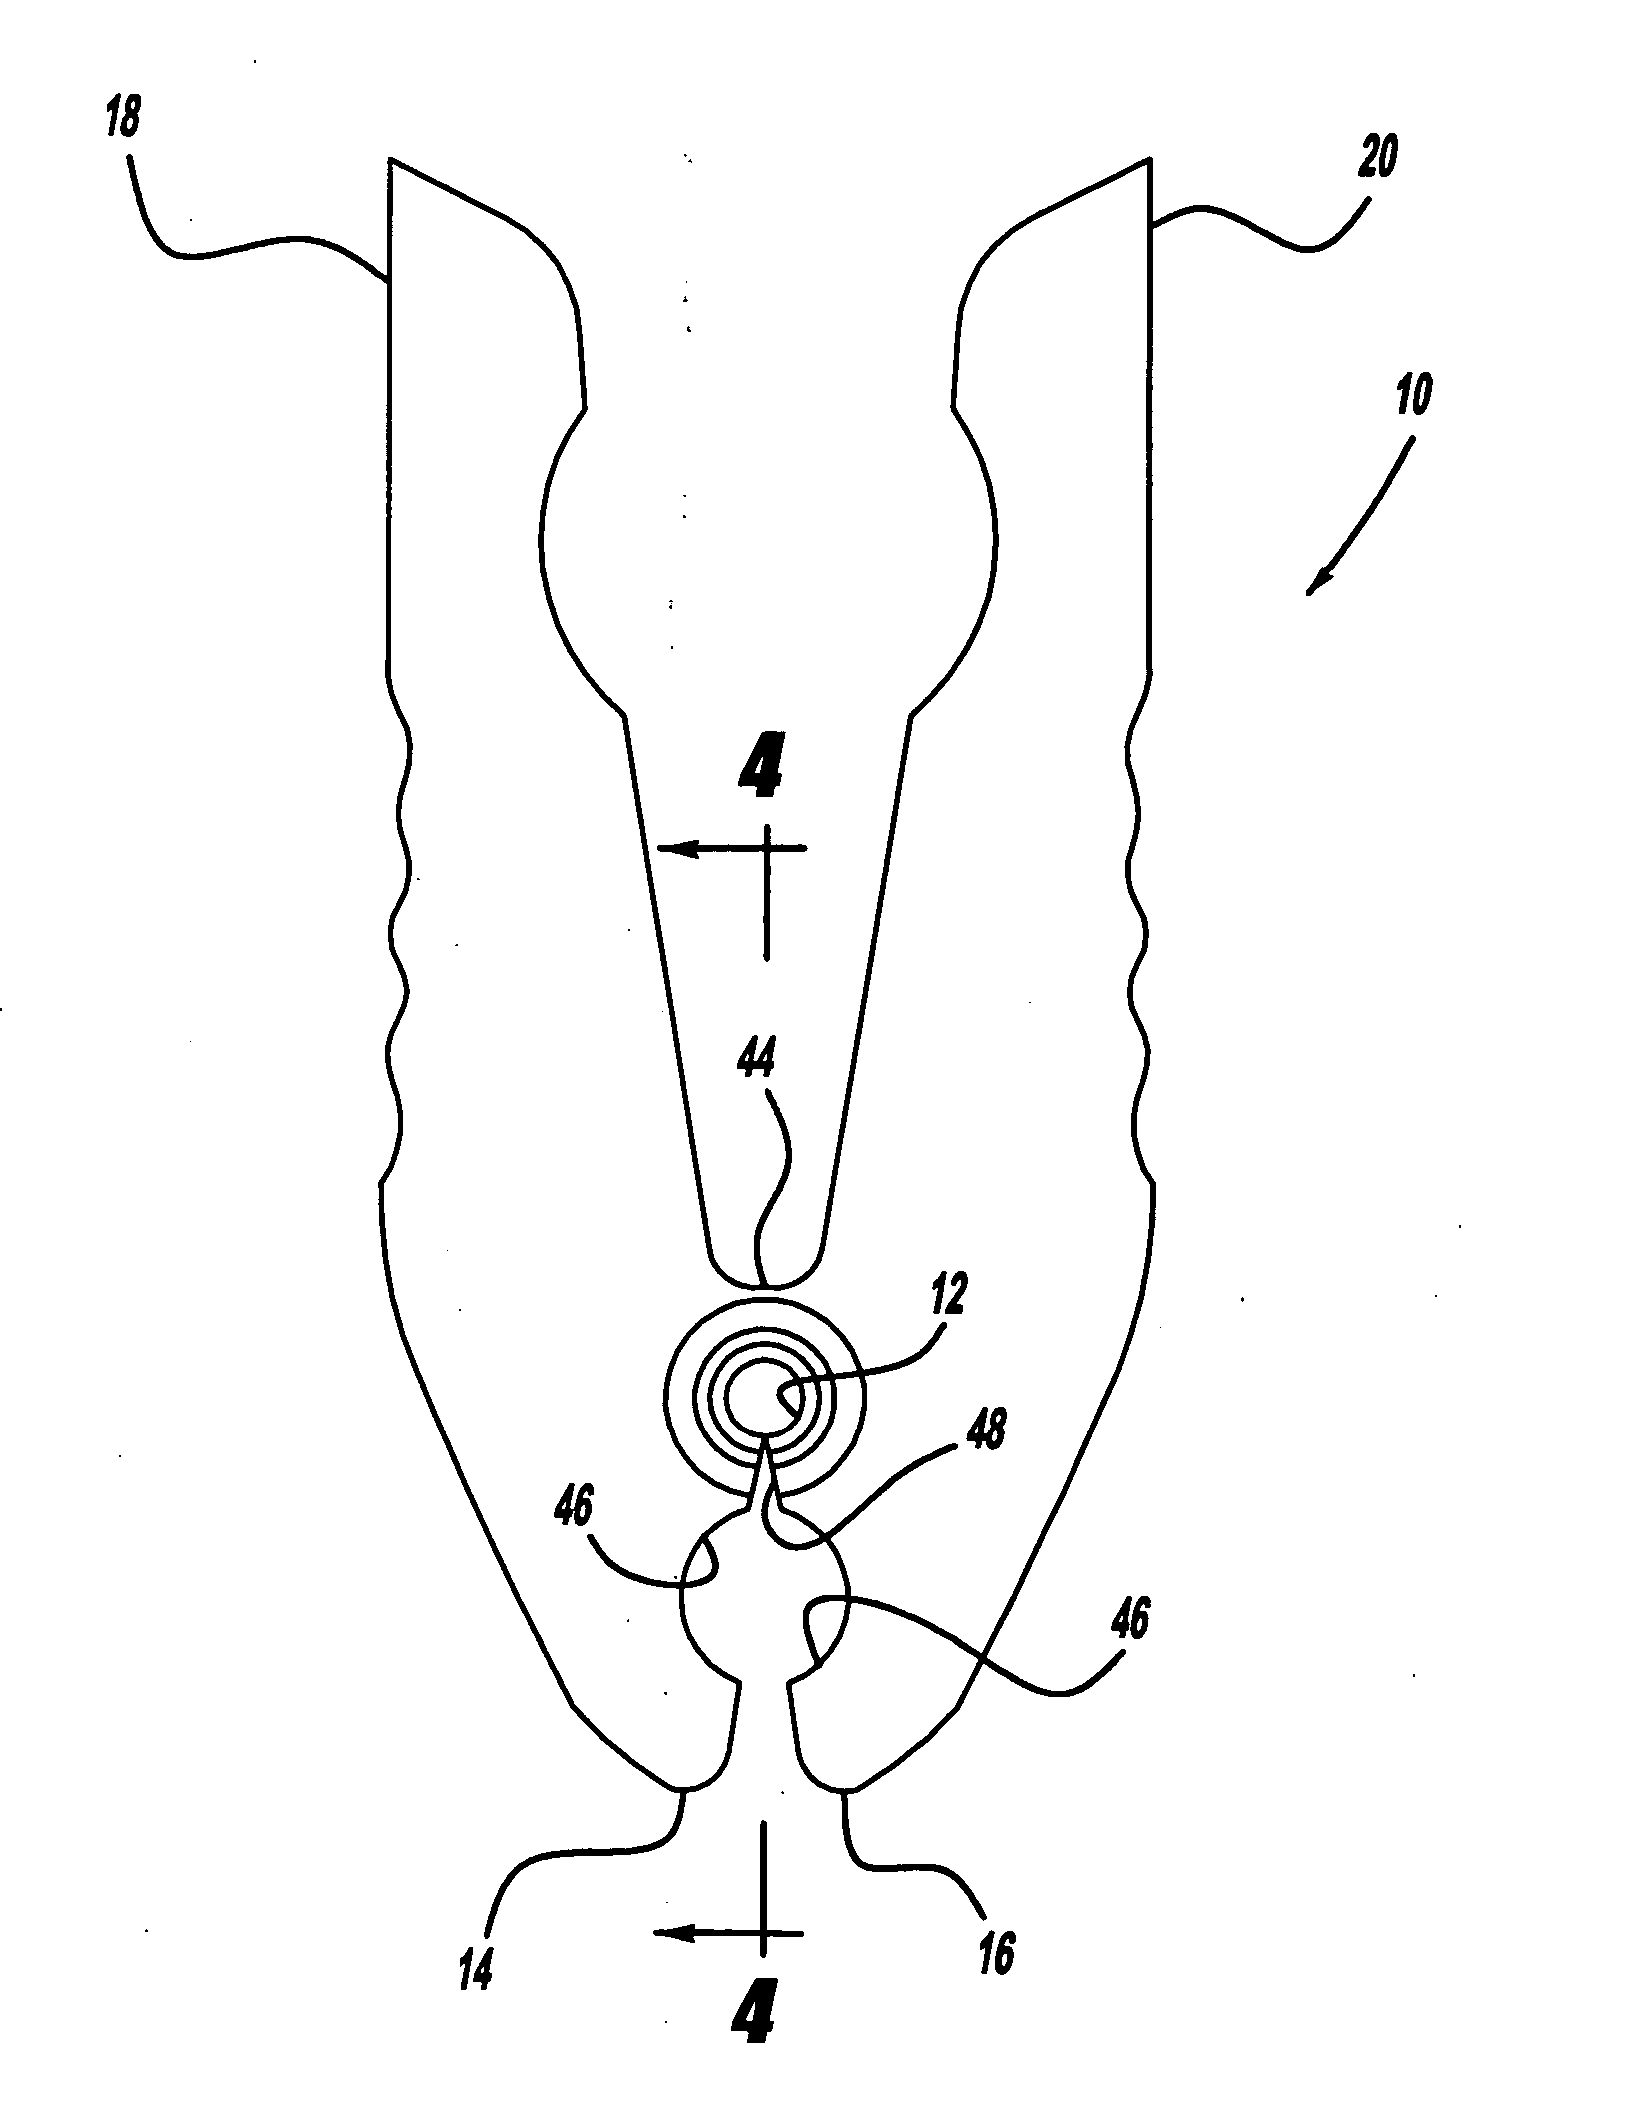 Catheter guidewire loading device and method